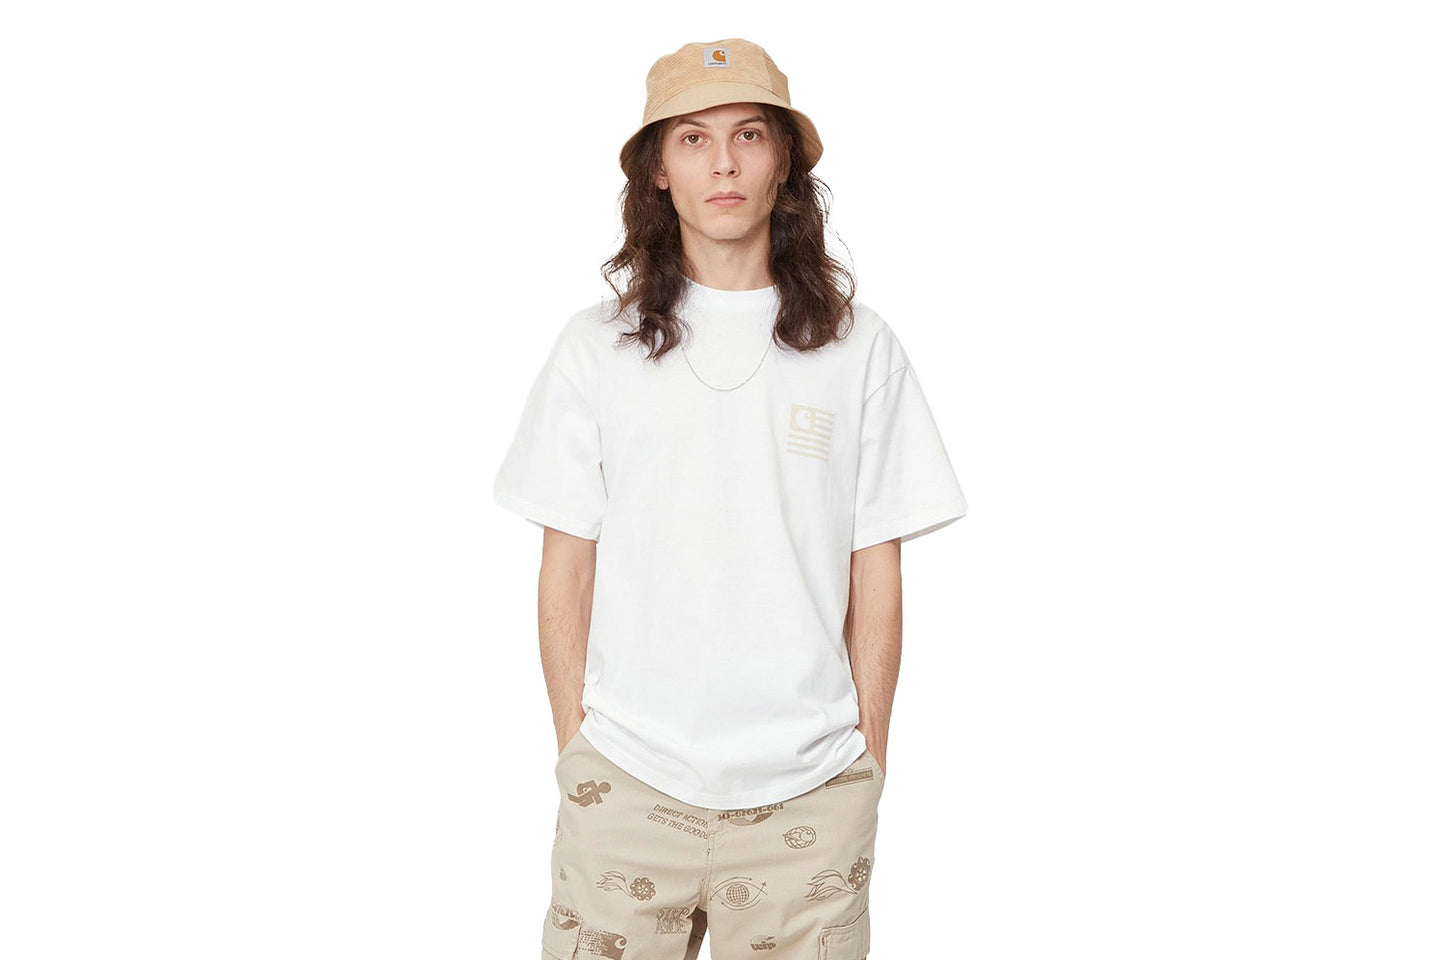 S/S Medley State T-Shirt